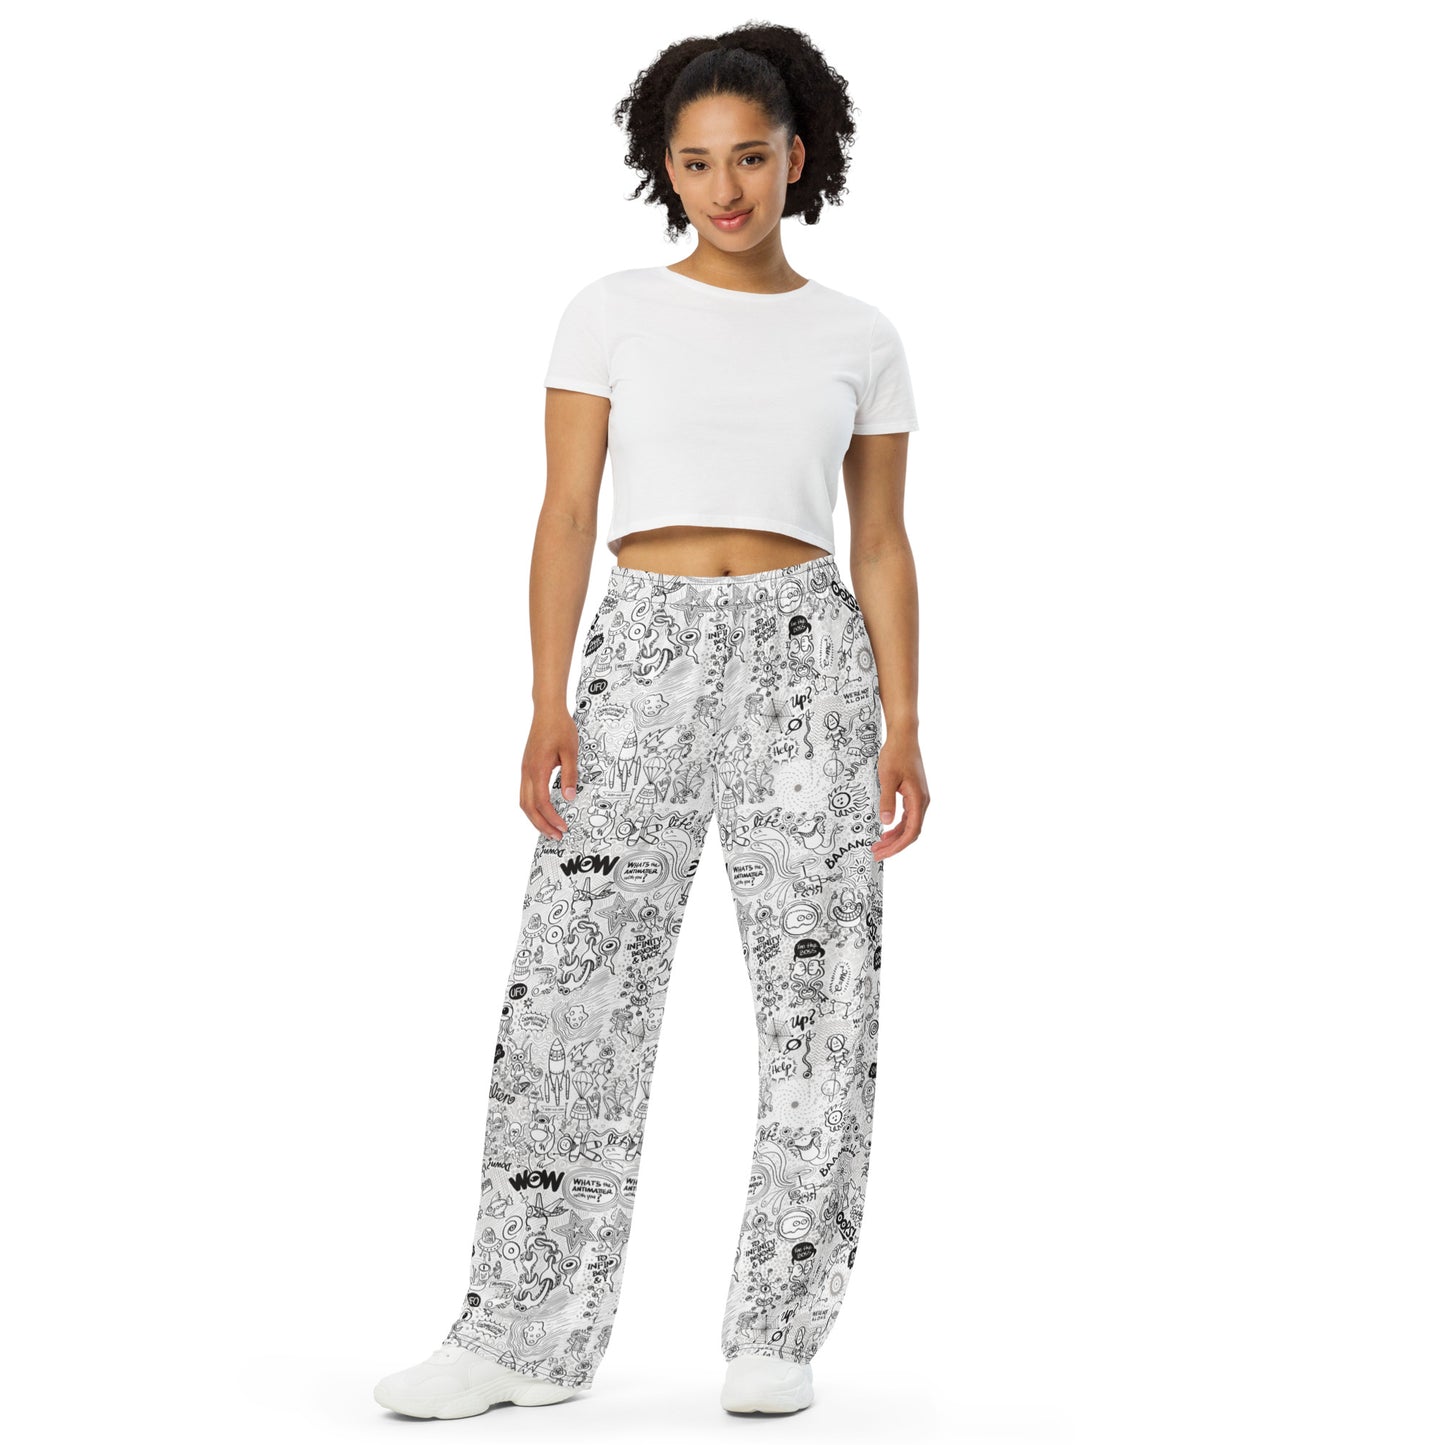 The most comprehensive Doodle art of the universe All-over print unisex wide-leg pants. Front view